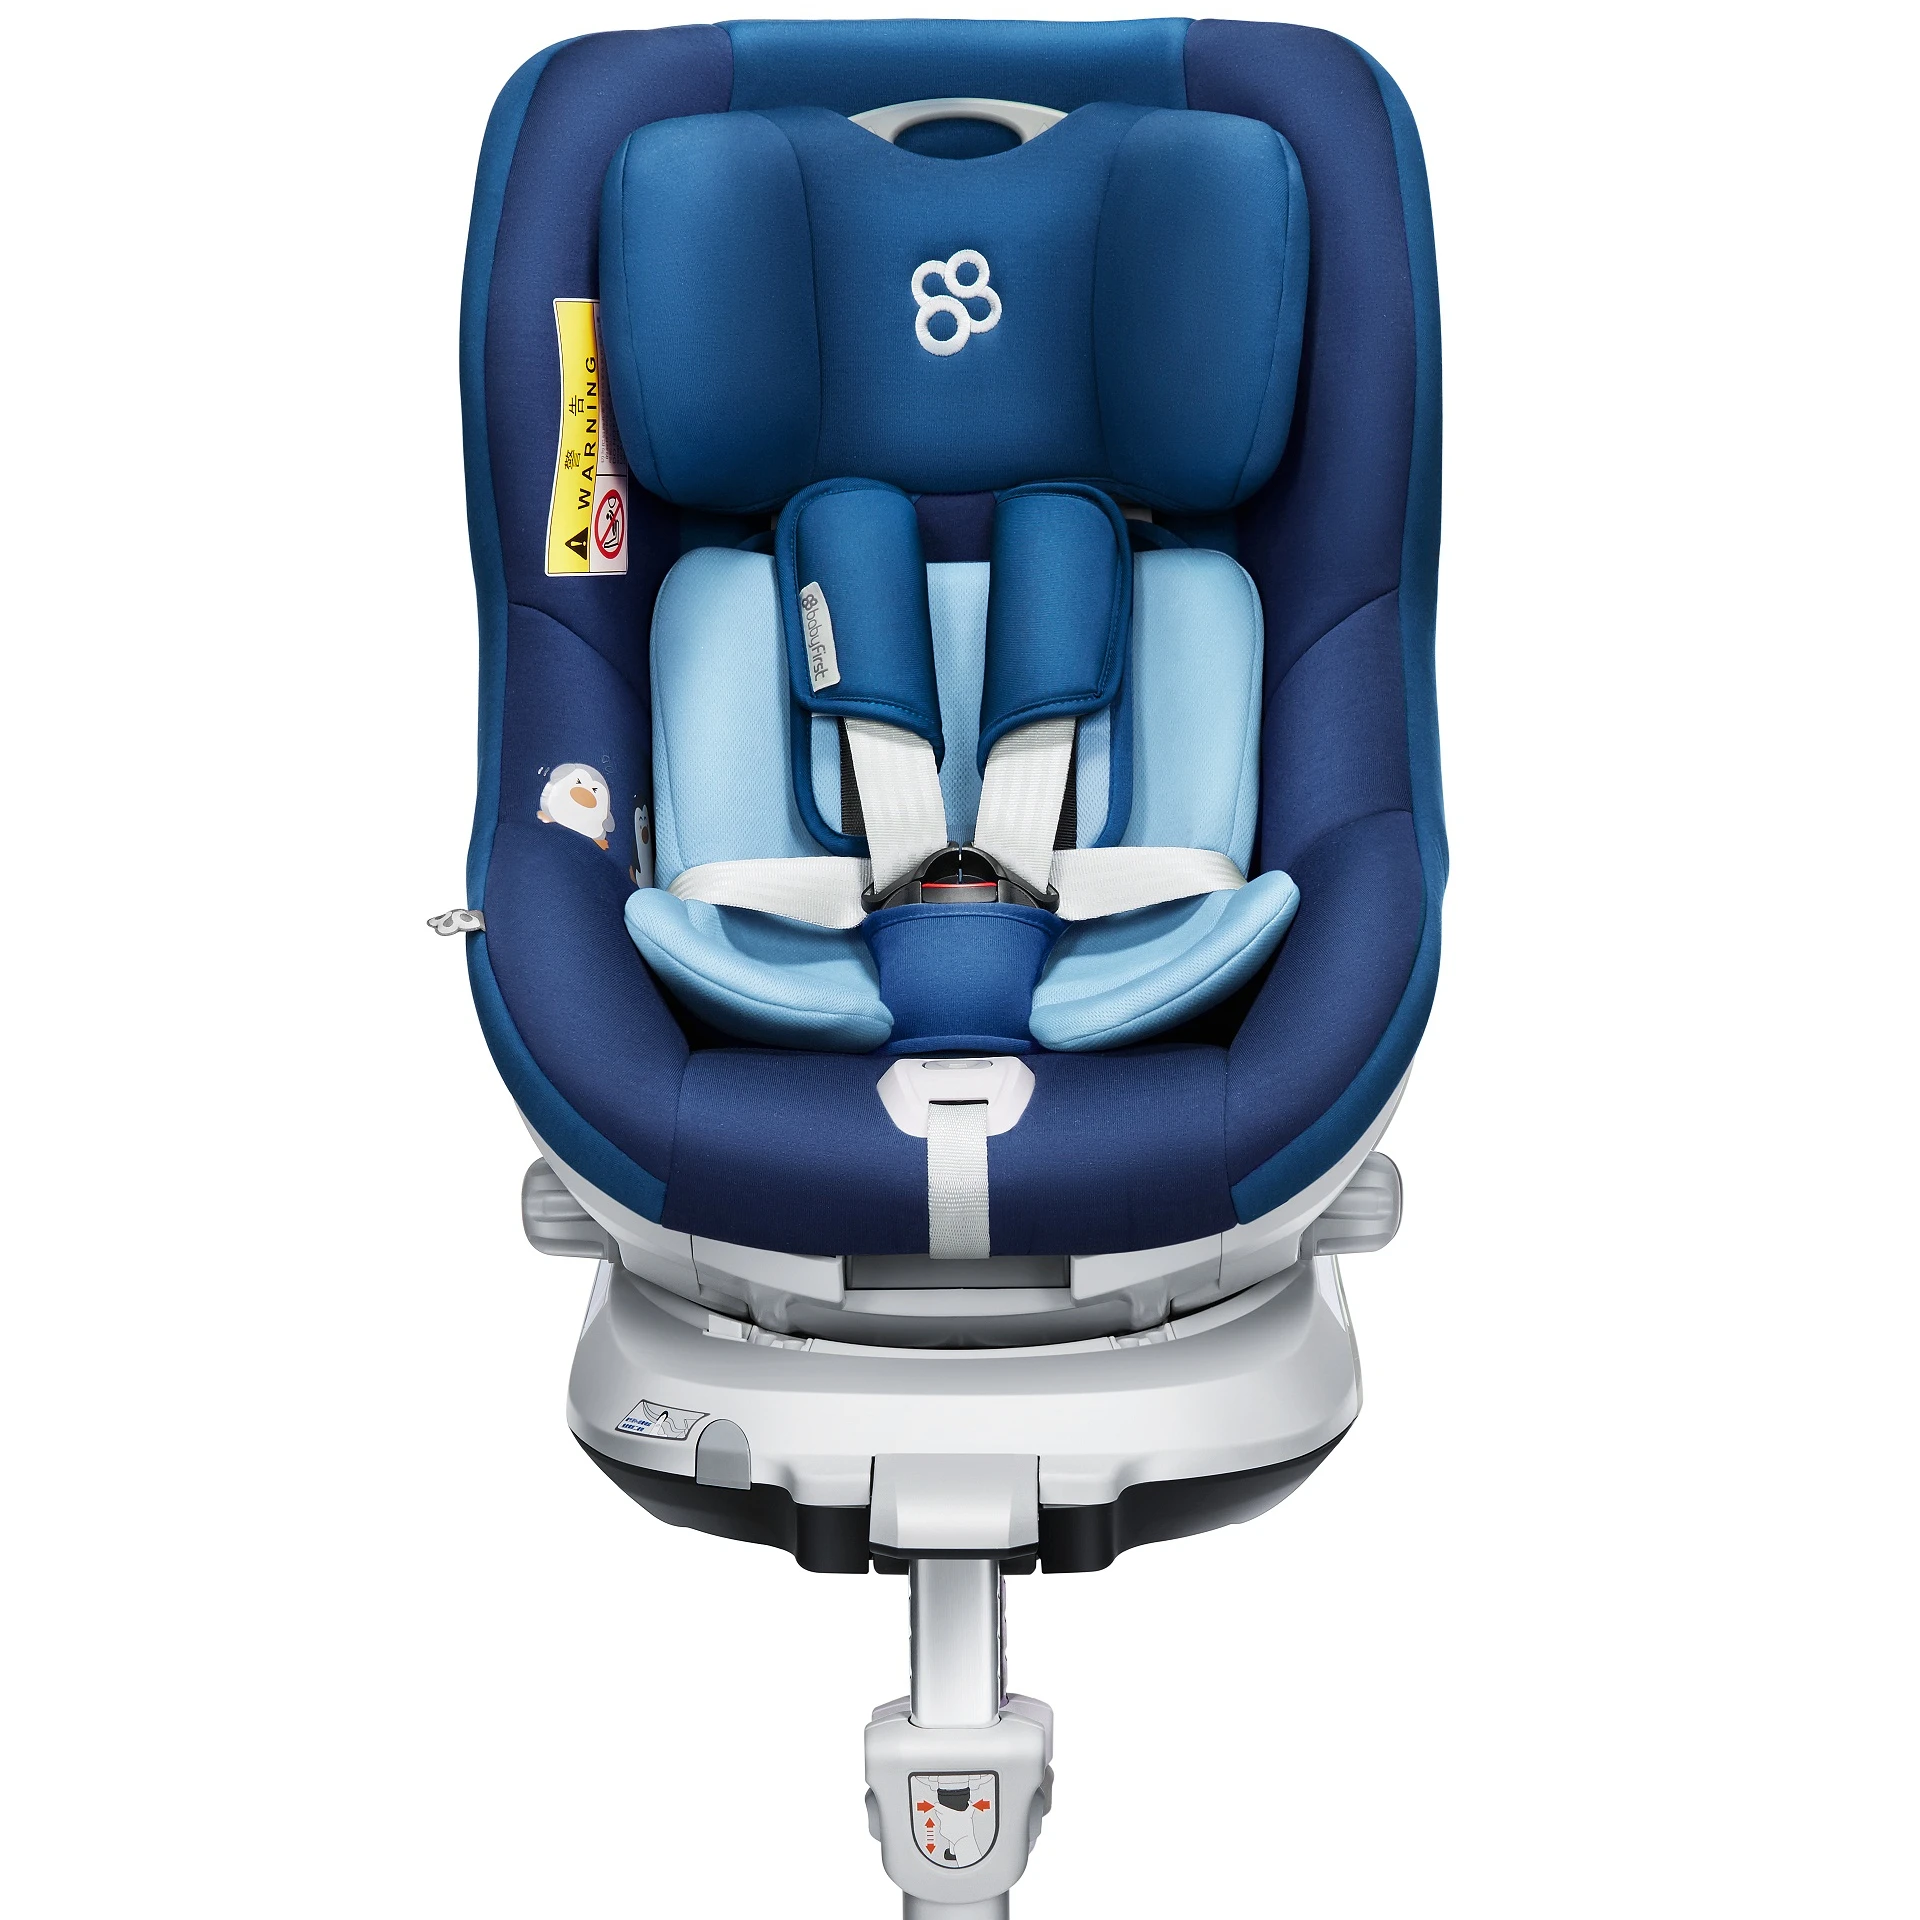 SILLA DE COCHE  R101A BLUE GROUP 0 I WITH ISOFIX&SUPPORT LEG ECE R44 360 ROTATE (1600204165266)